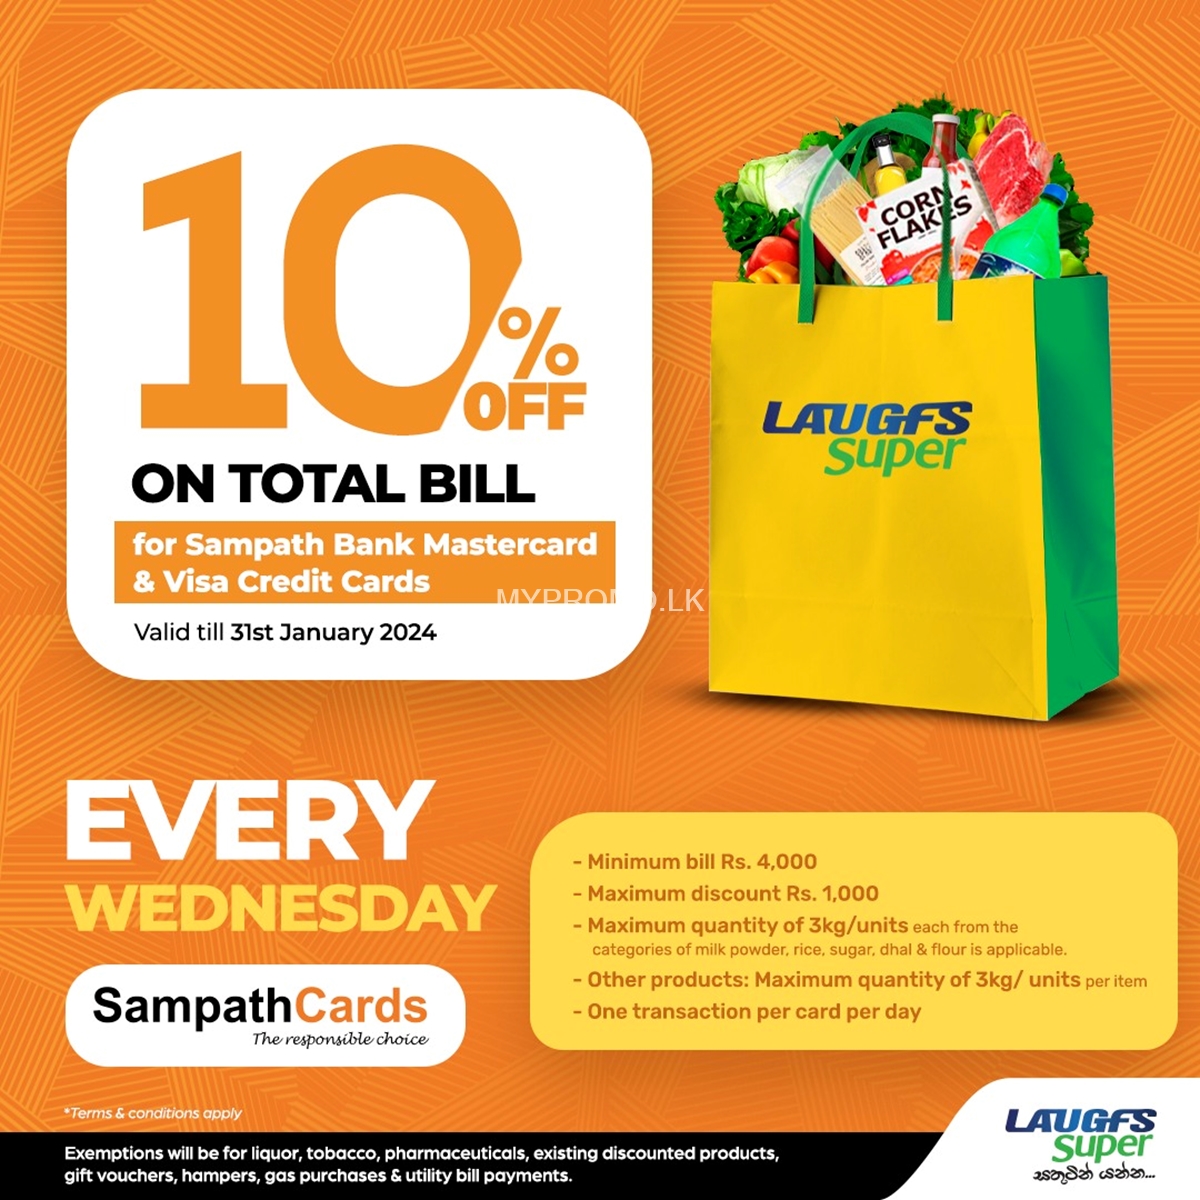 10% Off on Total Bill at LAUGFS Supermarket for Sampath Credit Cards